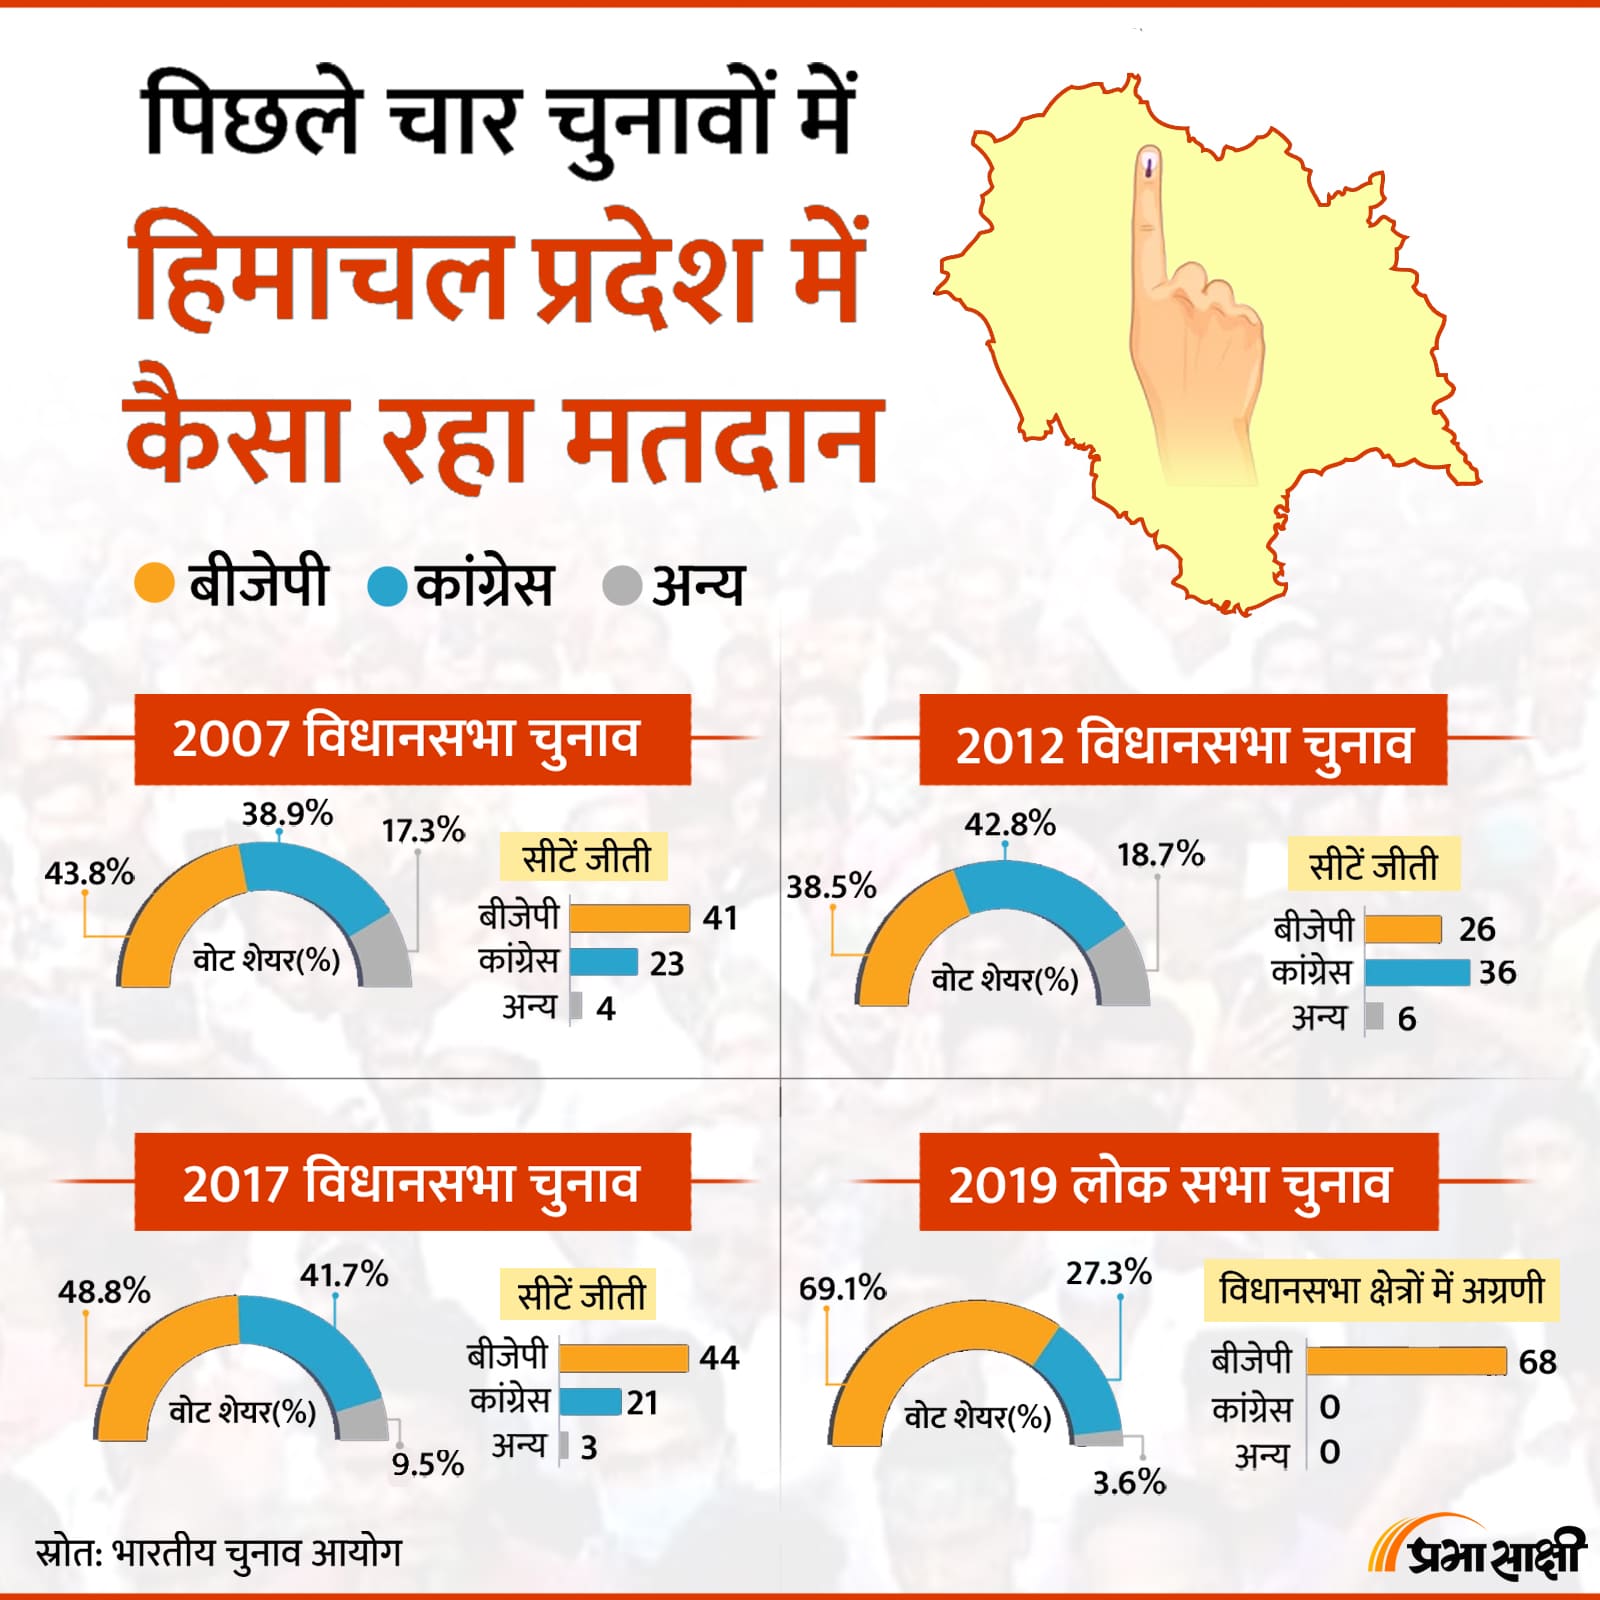 How Himachal Pradesh Voted in Last 4 Elections